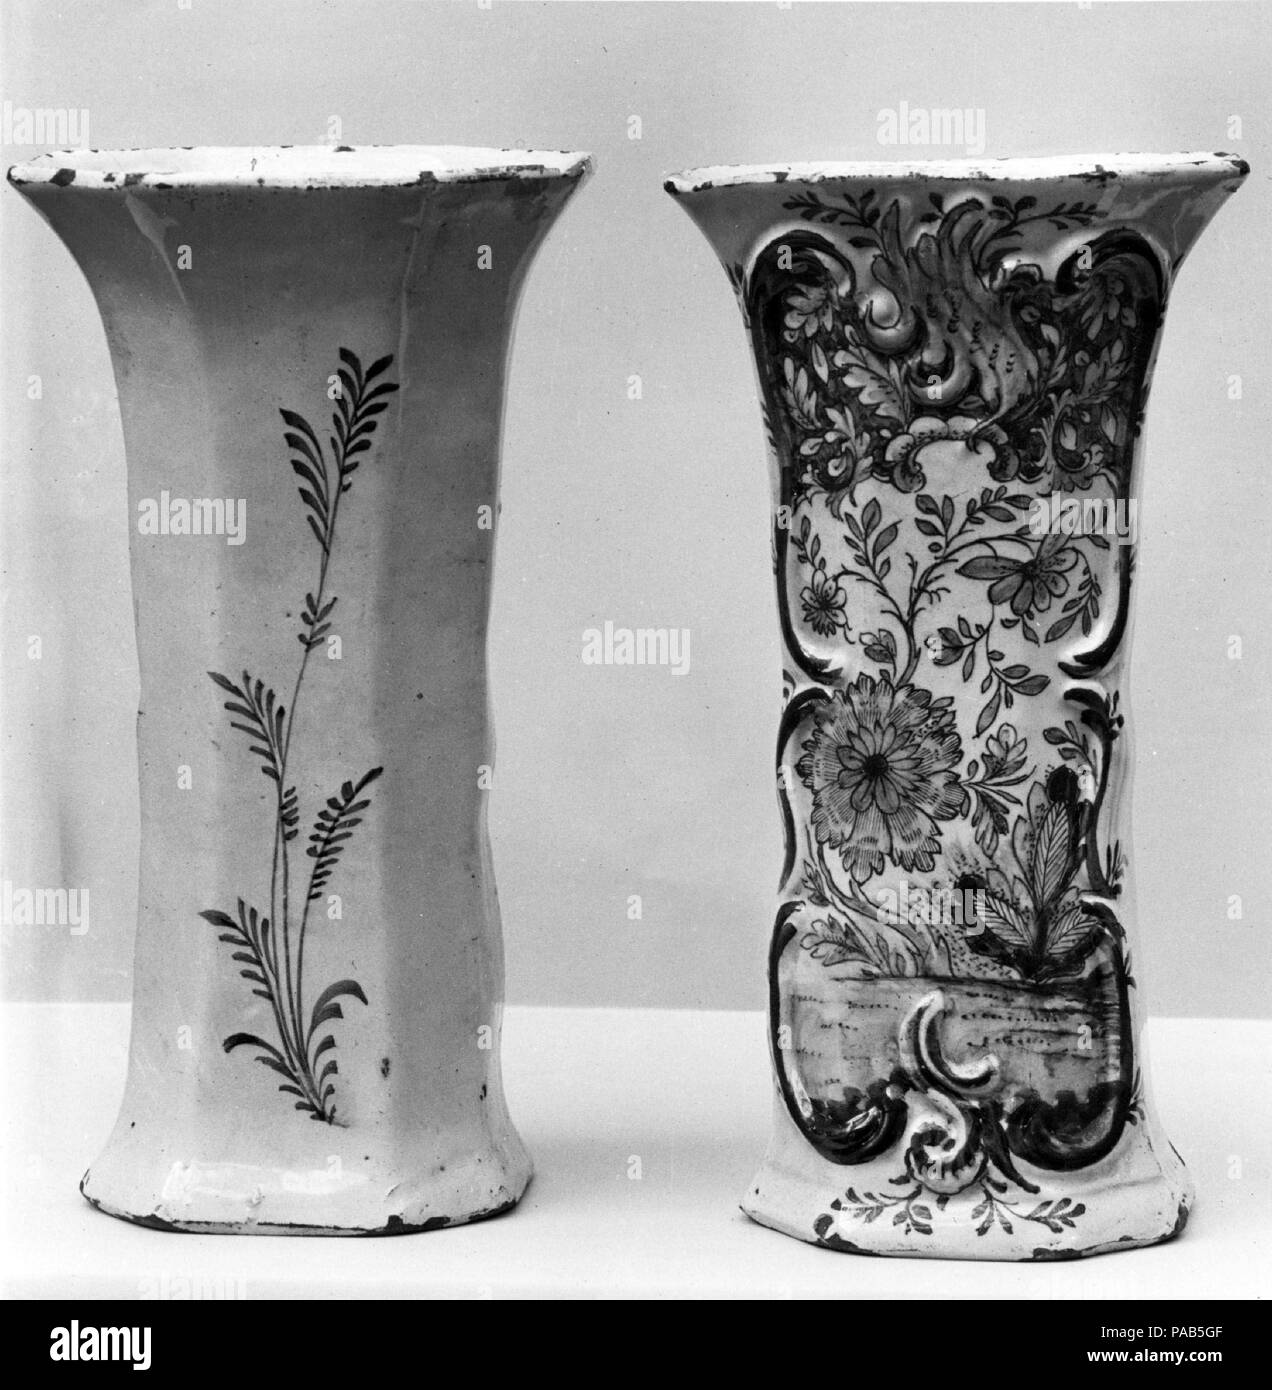 Vase. Culture: Dutch. Designer: Designed by Justus Brouwer (Dutch, active 1739-1775). Dimensions: H. 10 3/8 in. (26.4 cm). Manufacturer: Manufactured by The Porcelain Axe. Date: 1739-75. Museum: Metropolitan Museum of Art, New York, USA. Stock Photo